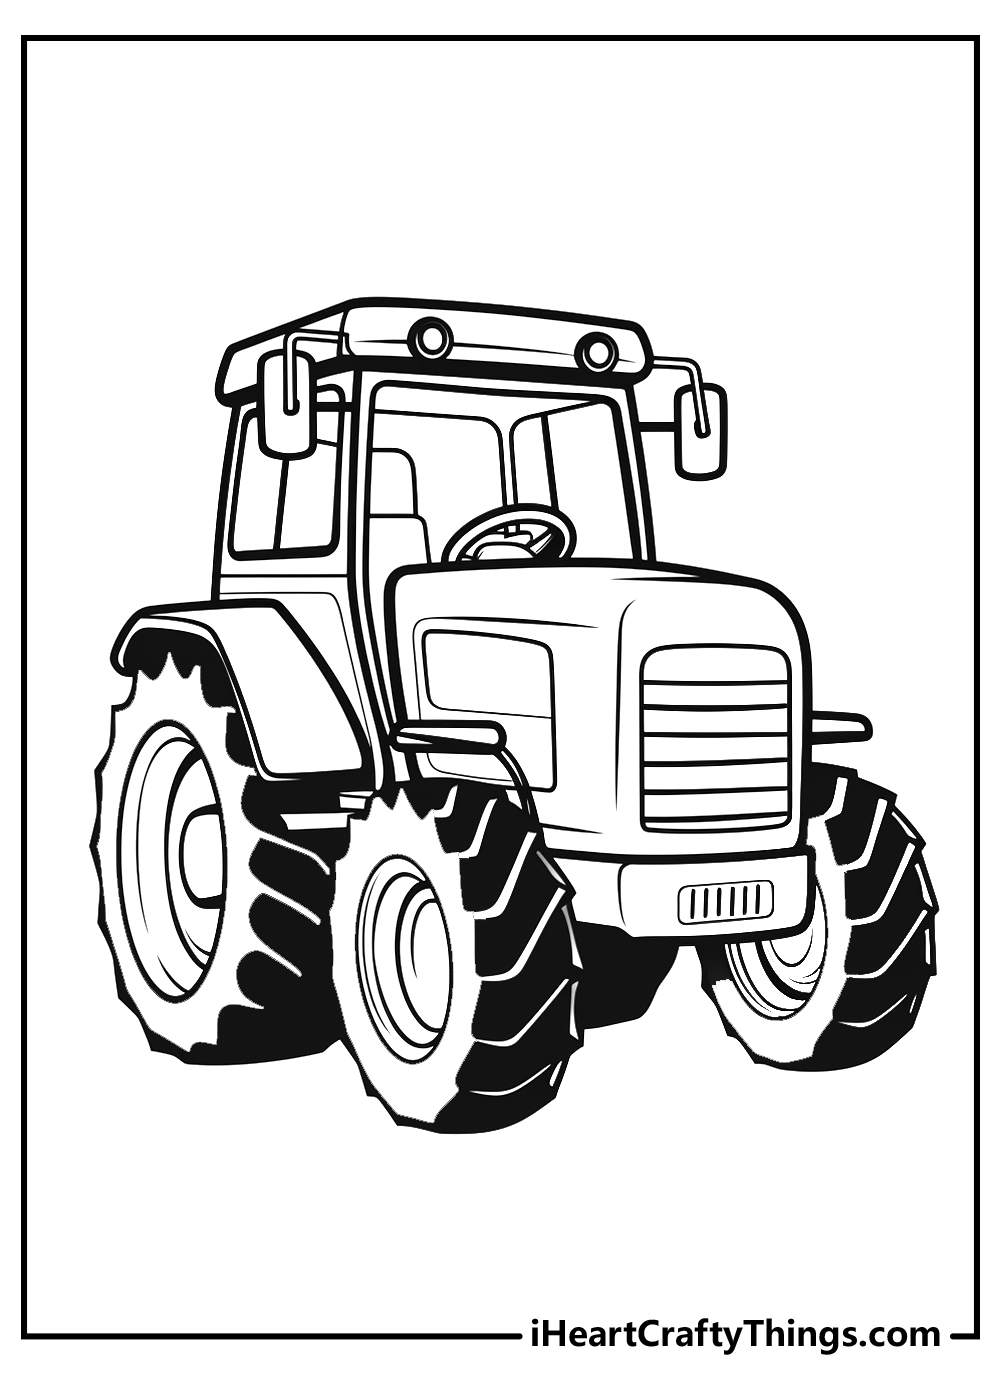 Learn Colors with Farm Tractor, Colorful Tractors